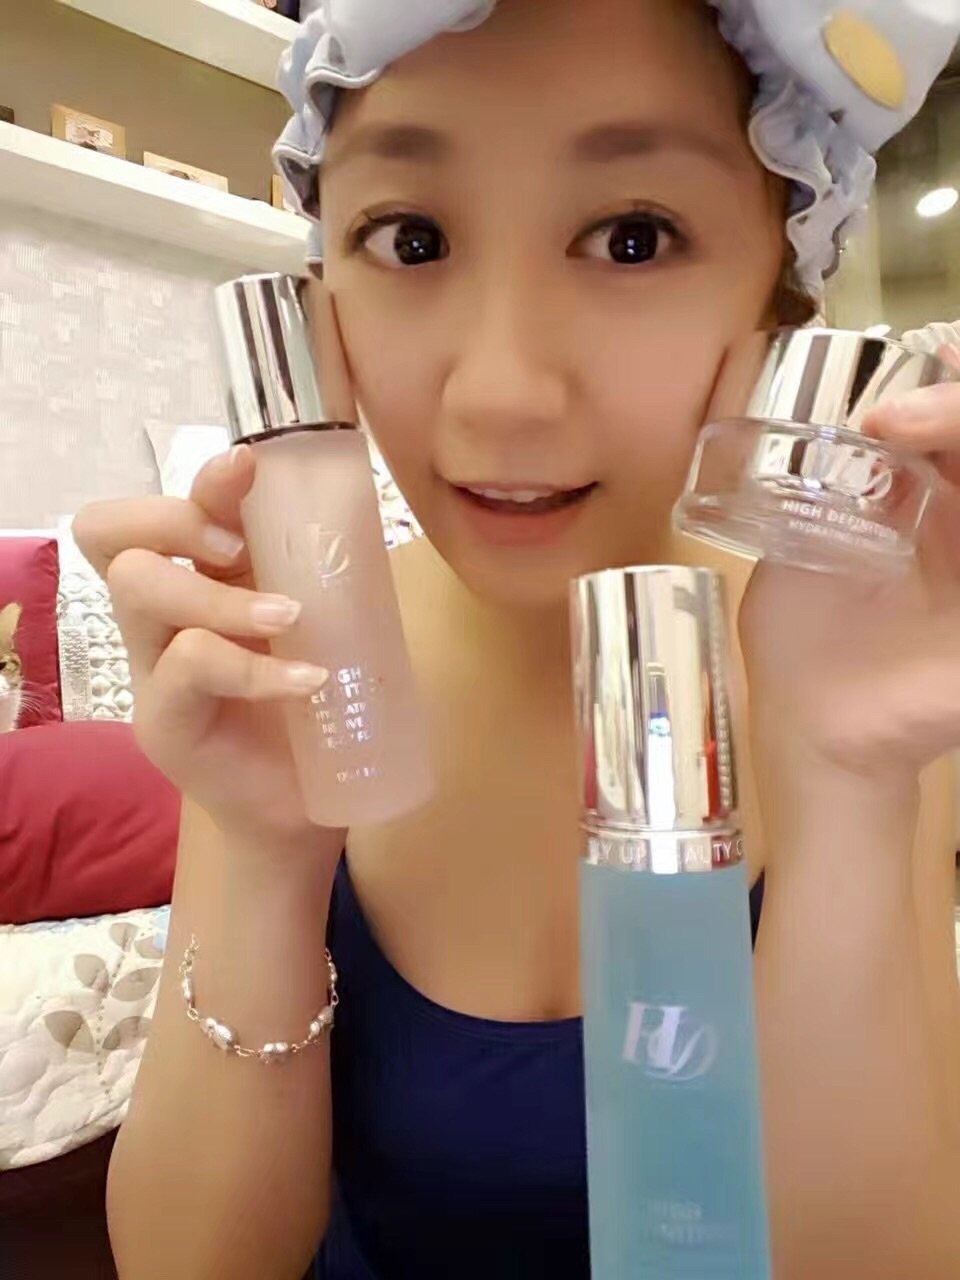 Fly Up HD Skin Activating Hydrating Essence - fly up beauty HD makeup professional make up kattong 